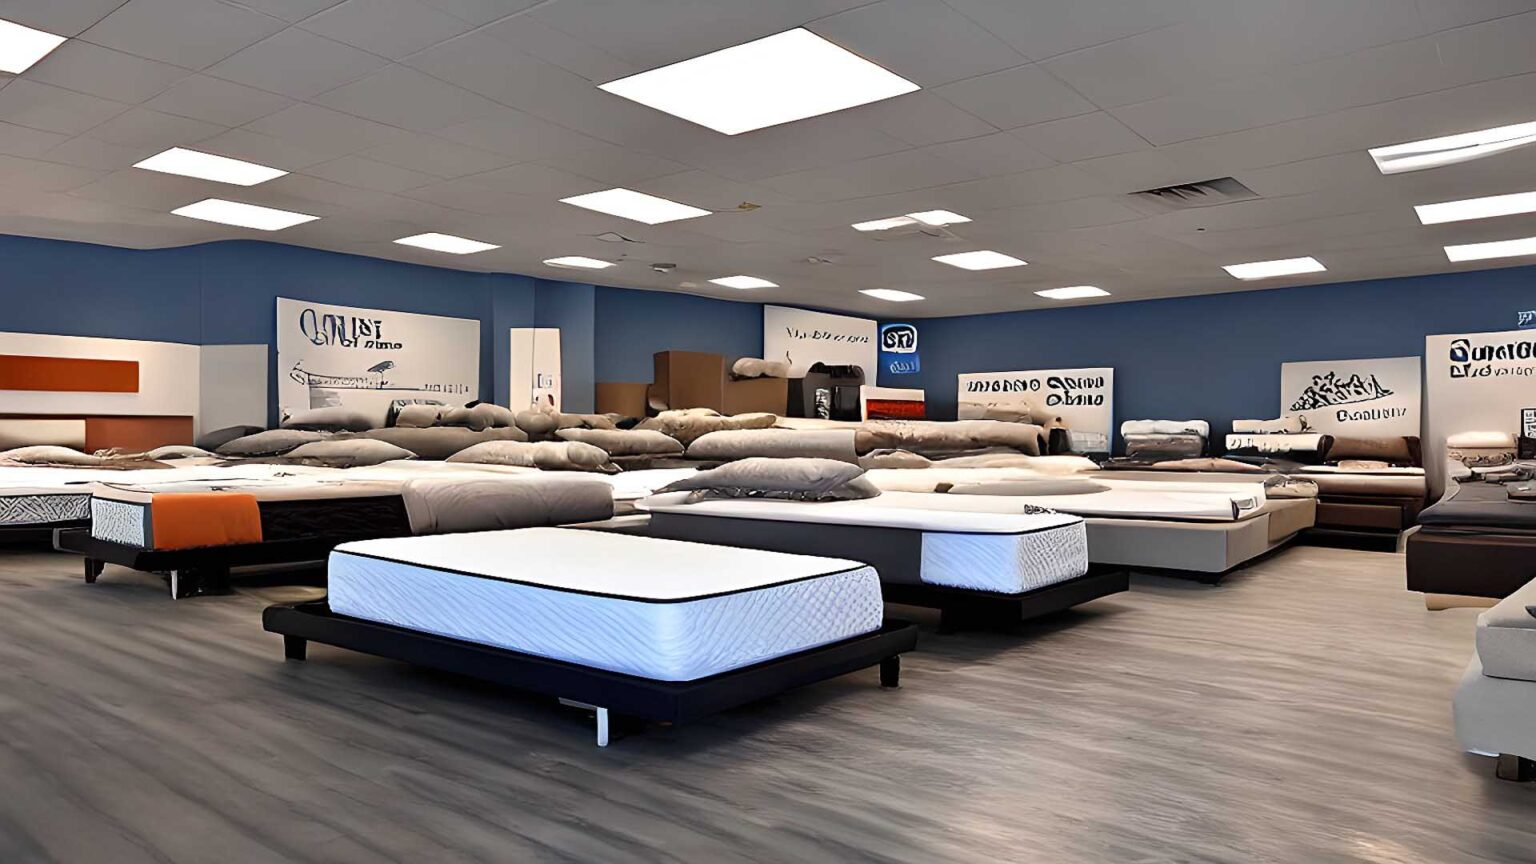 Mattress Stores, mattress dealers, and mattress retailers near me in Akron, OH